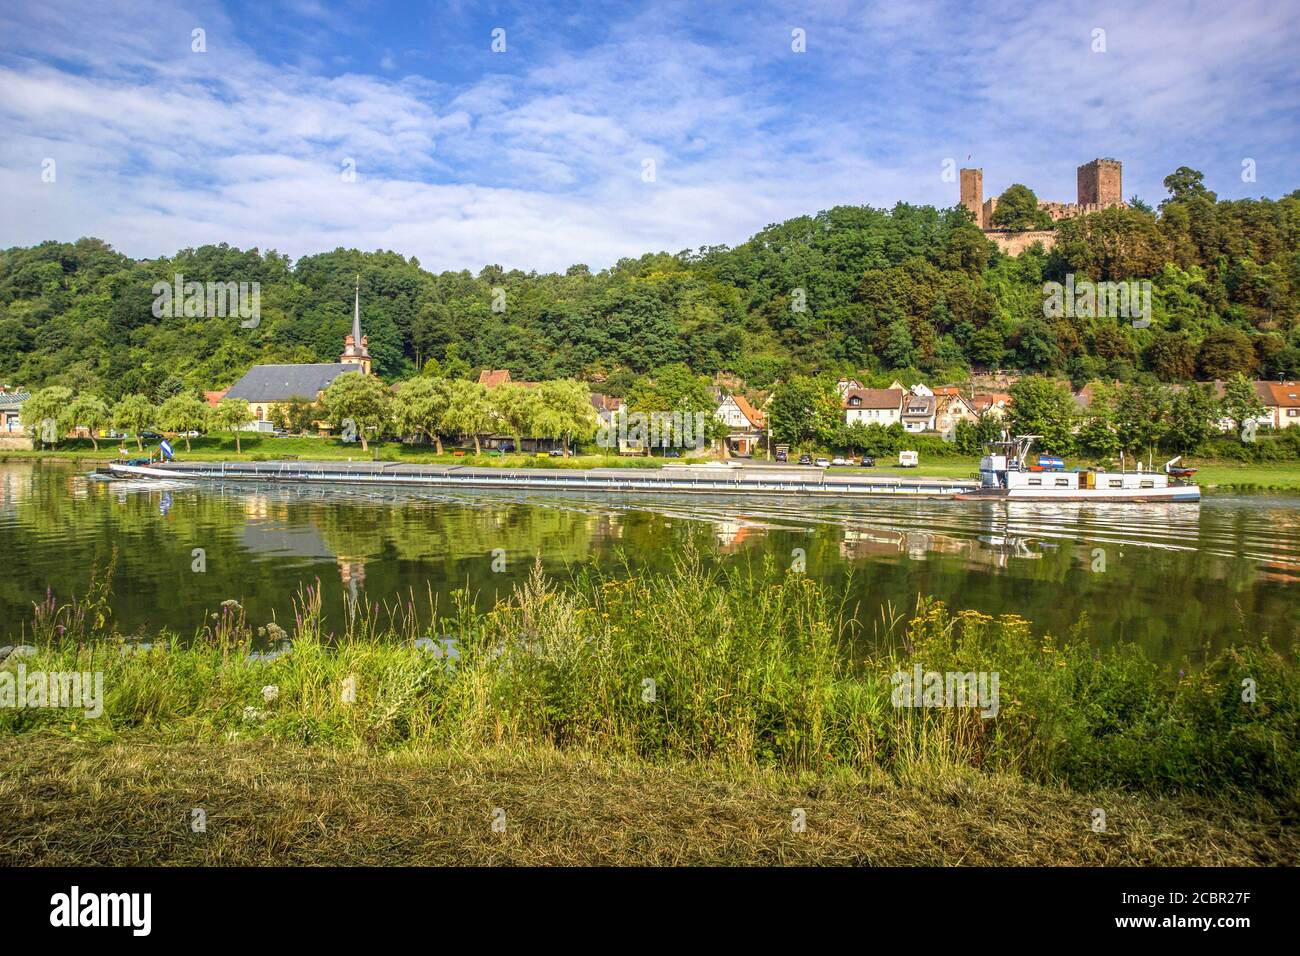 GERMANY HENNEBURG. A cargo ship navigating the Main river below castle Henneburg in Bavaria Stock Photo